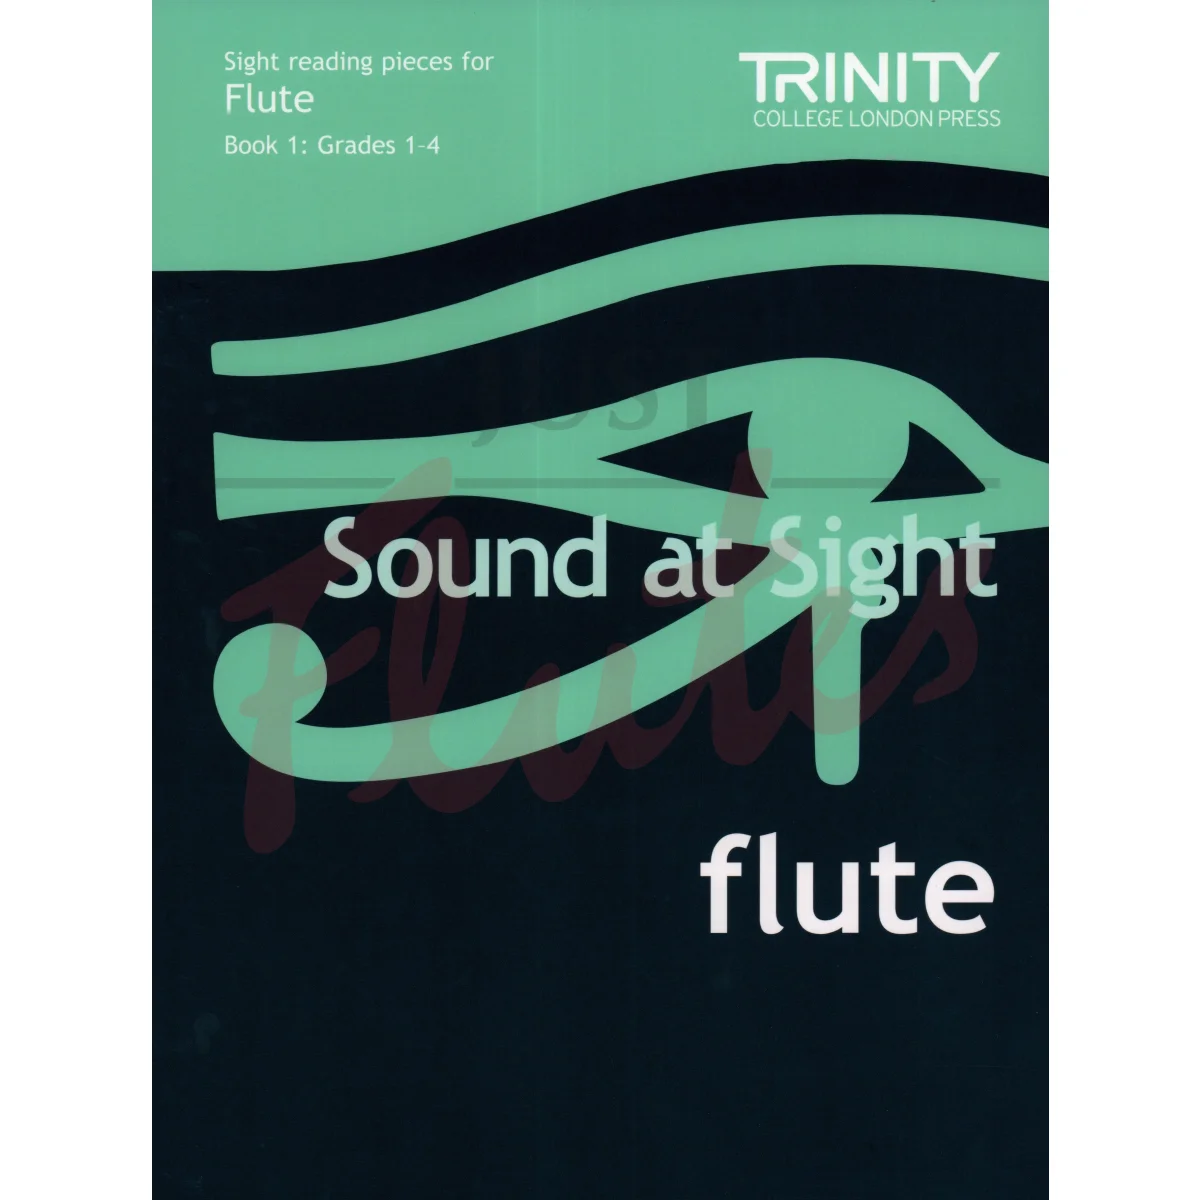 Sound at Sight Flute Book 1